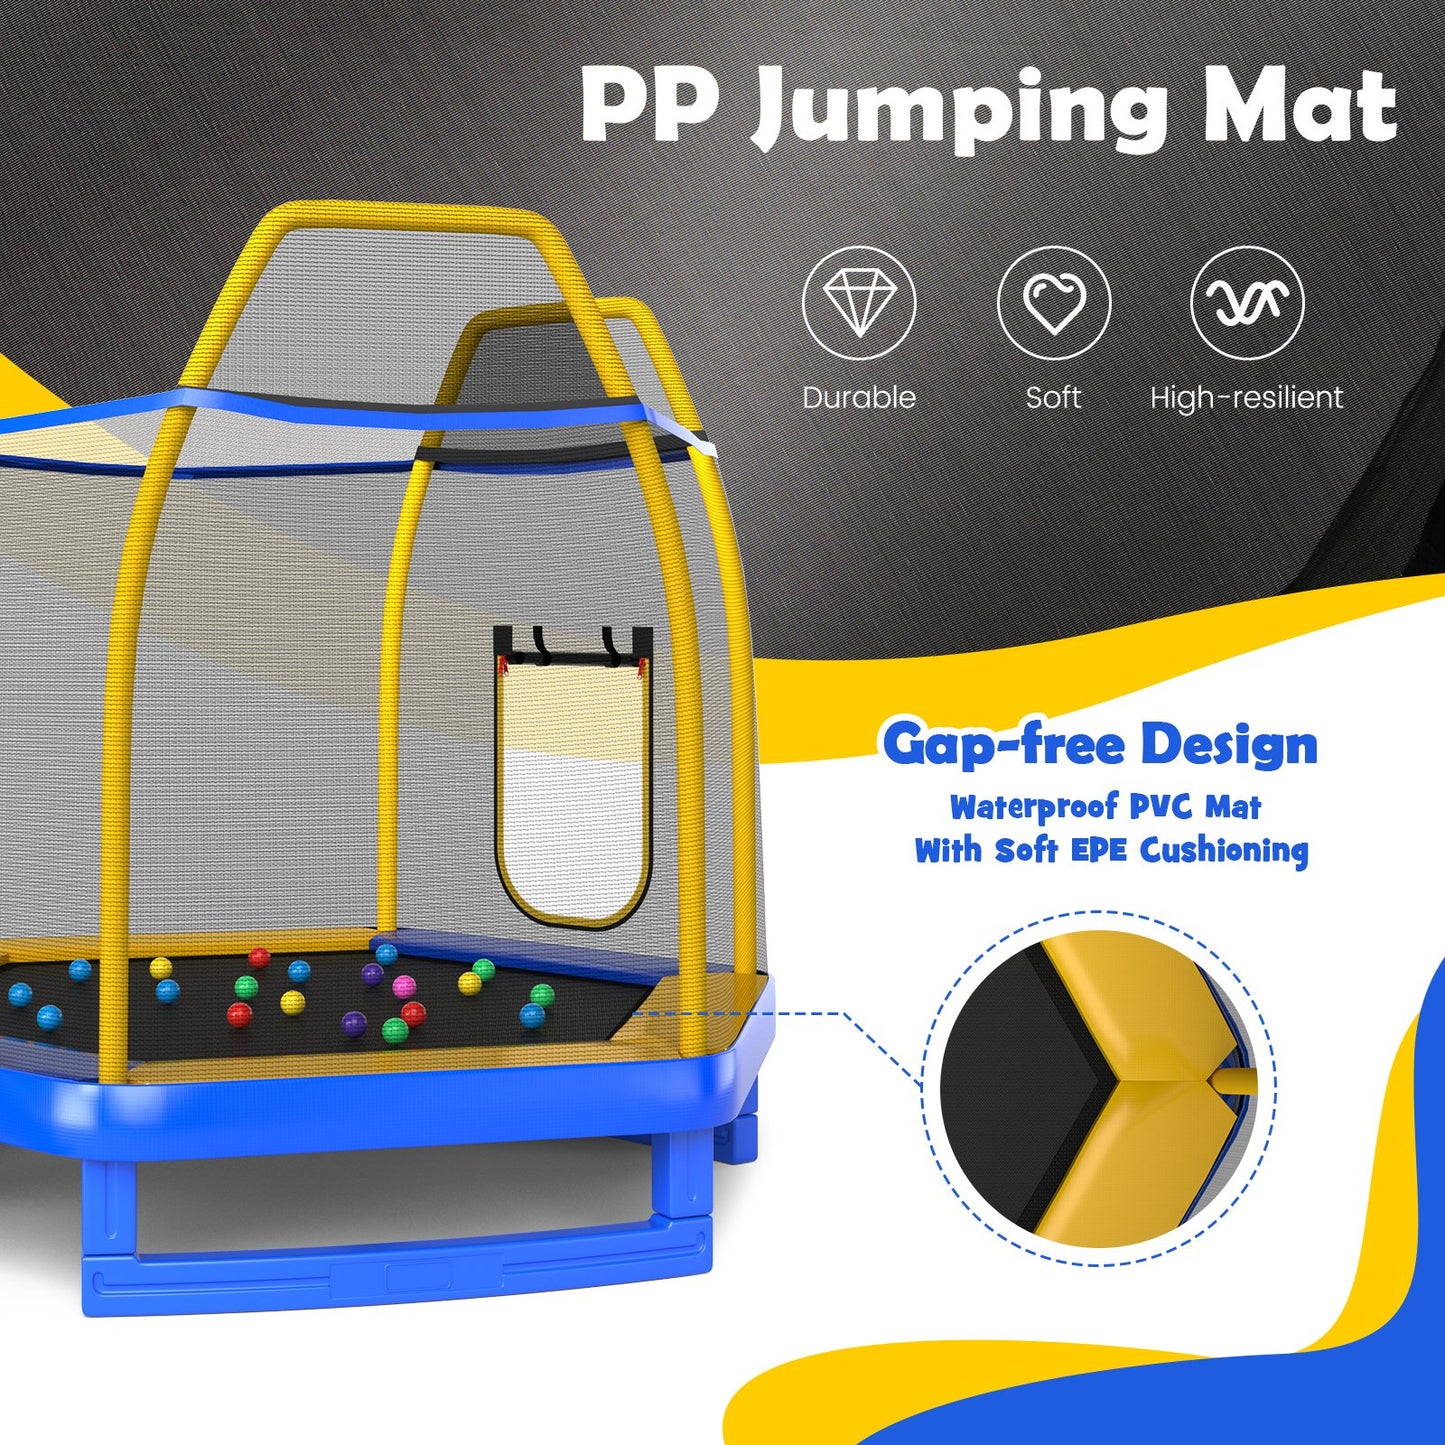 7 Feet Trampoline with Ladder and Slide for Indoor and Outdoor, Blue